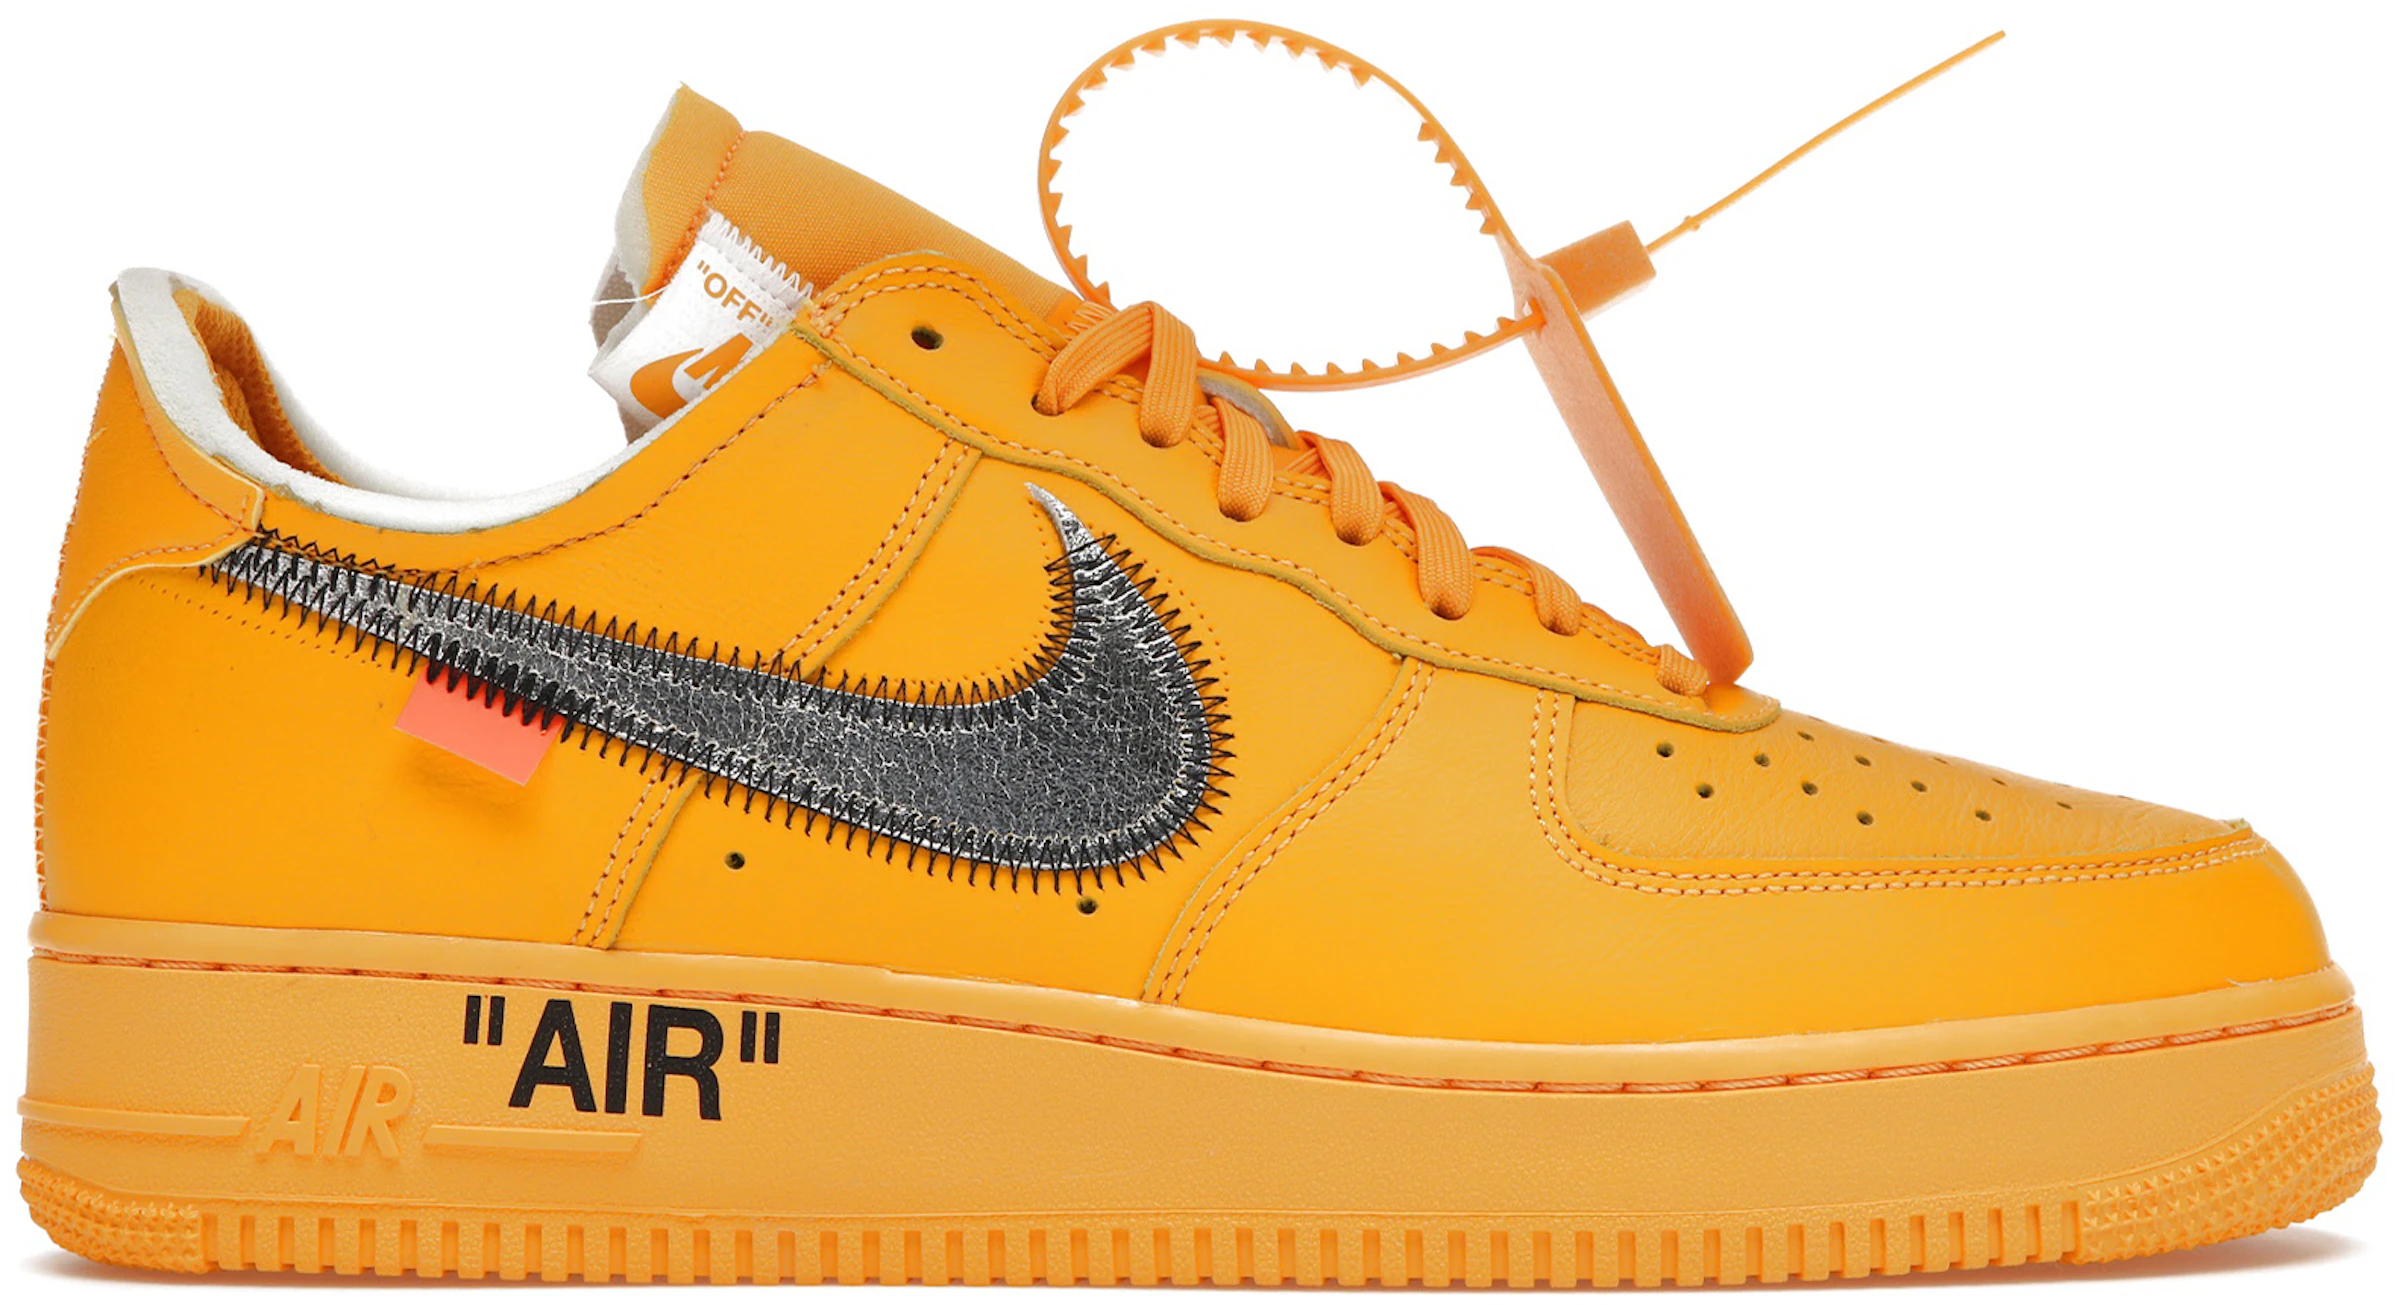 Nike Air Force 1 Low Off-White Ica University Gold - Dd1876-700 - Us